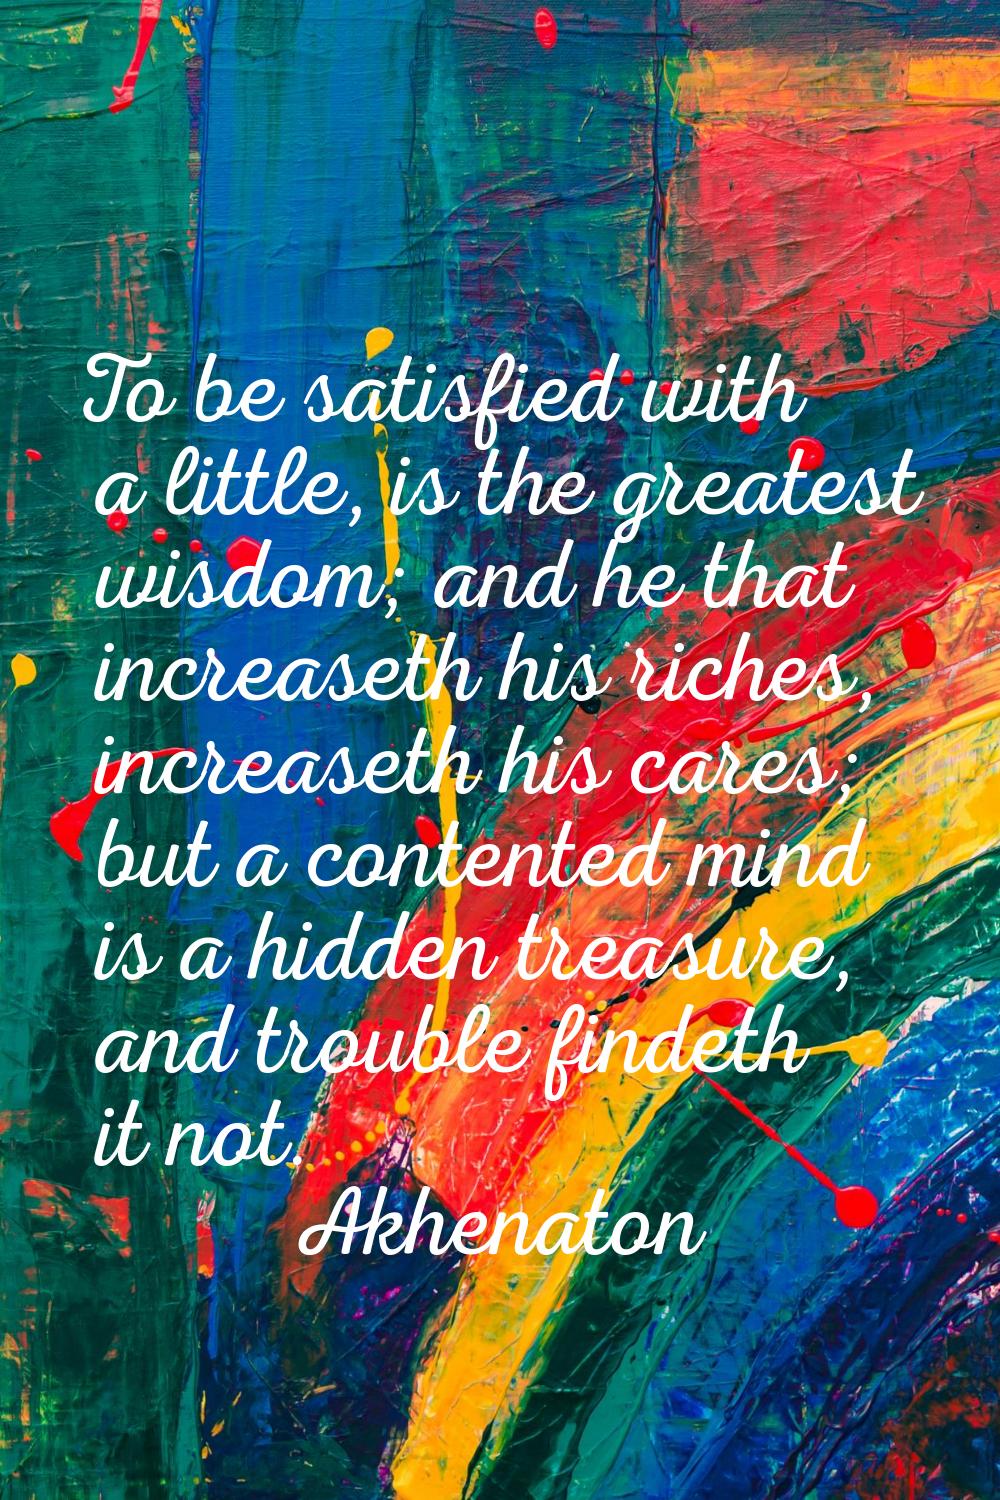 To be satisfied with a little, is the greatest wisdom; and he that increaseth his riches, increaset